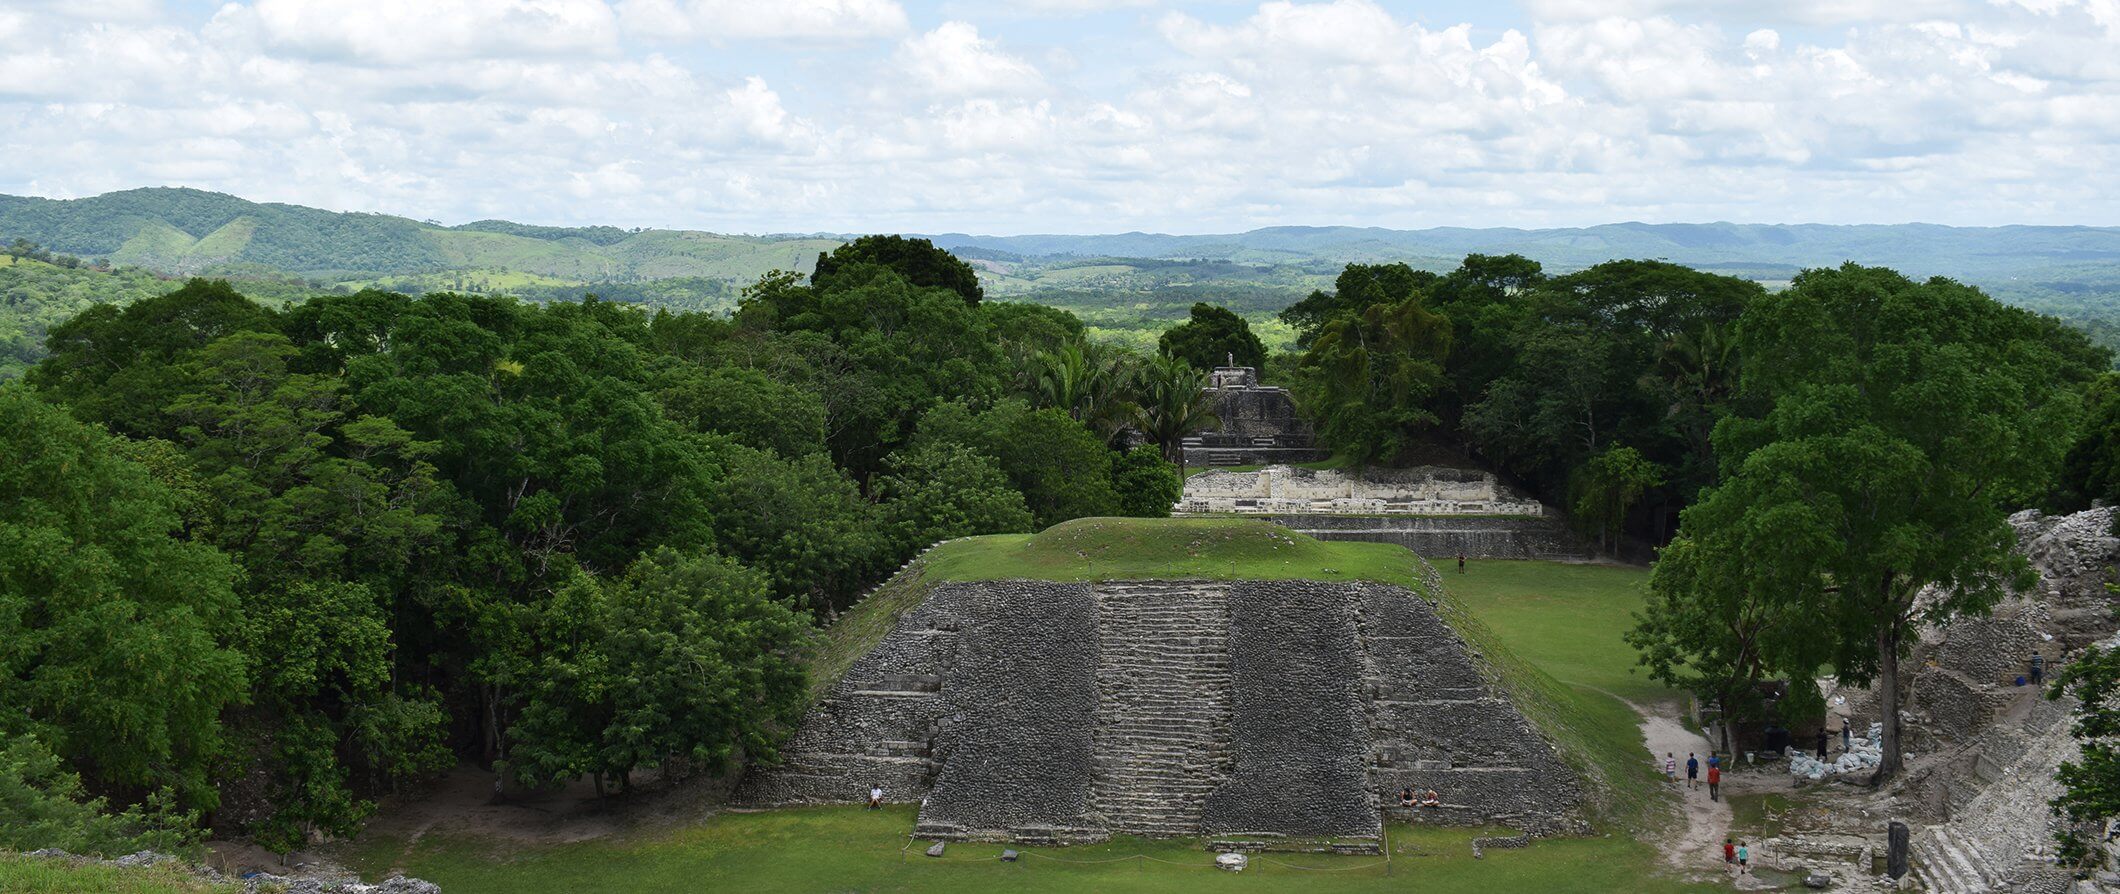 San Ignacio ruins in Belize taken from a high vantage point surrounded by jungle